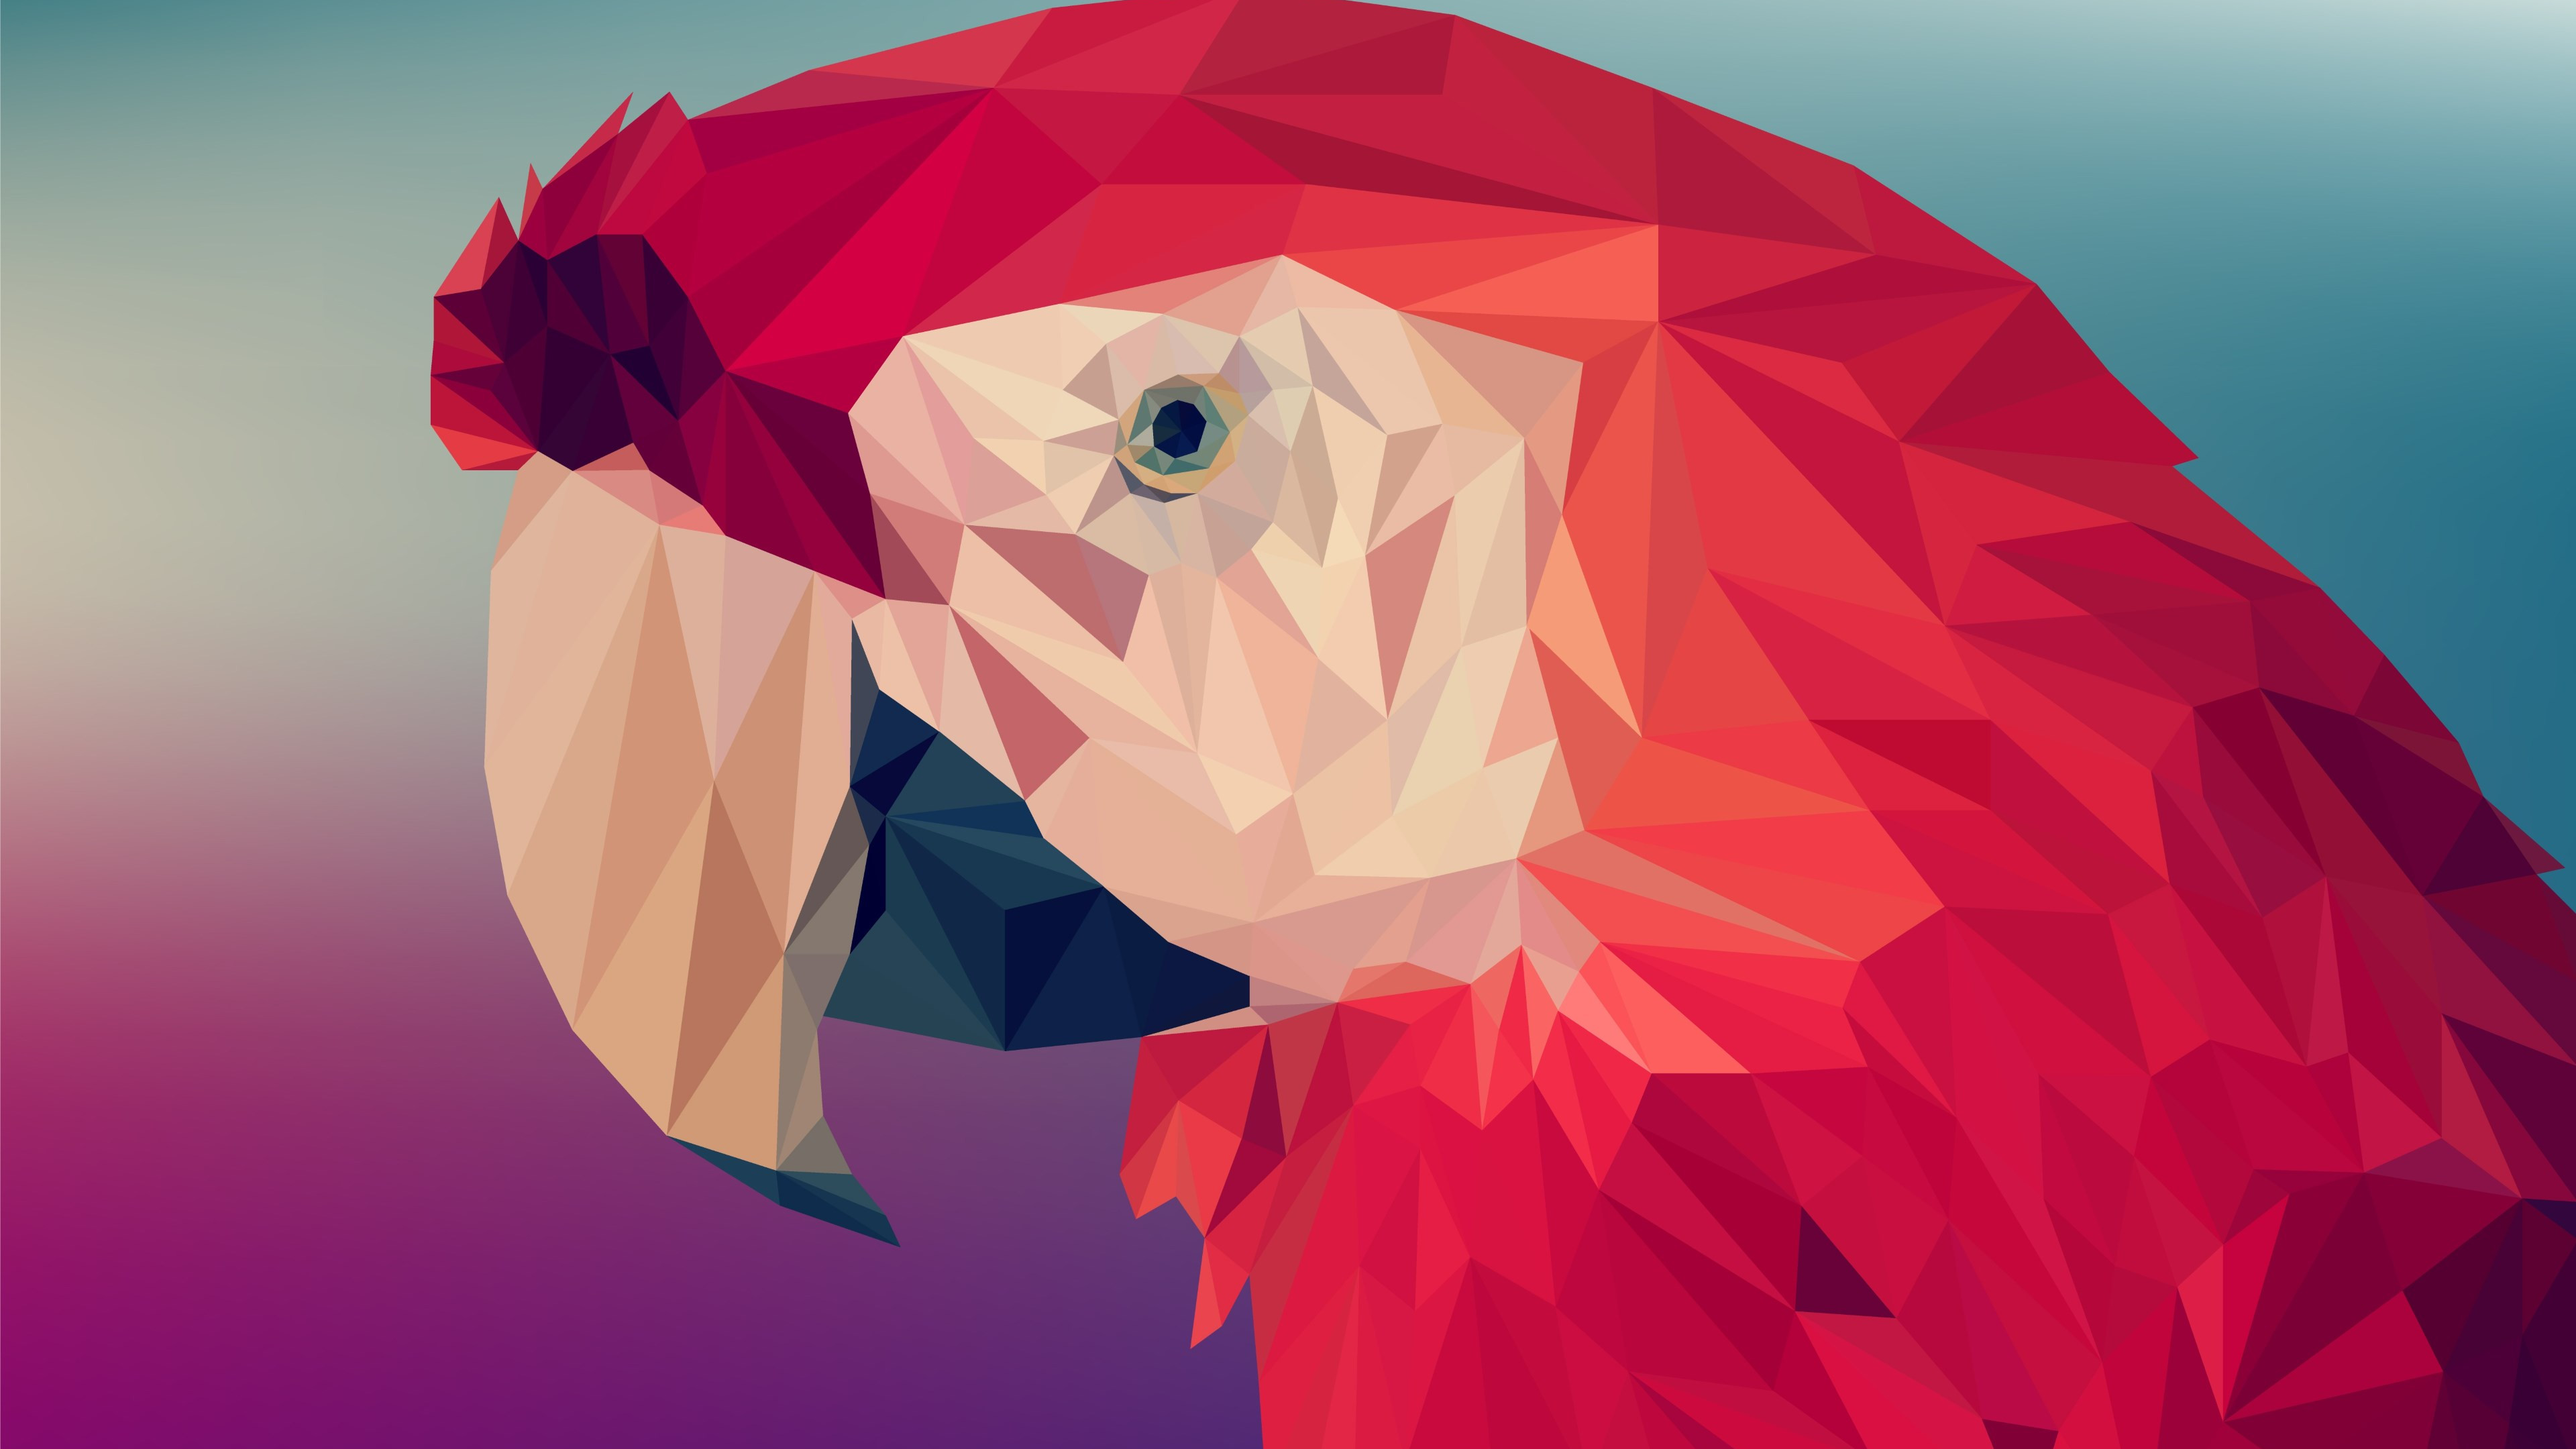 Low poly art: Red parrot wallpaper 3840x2160